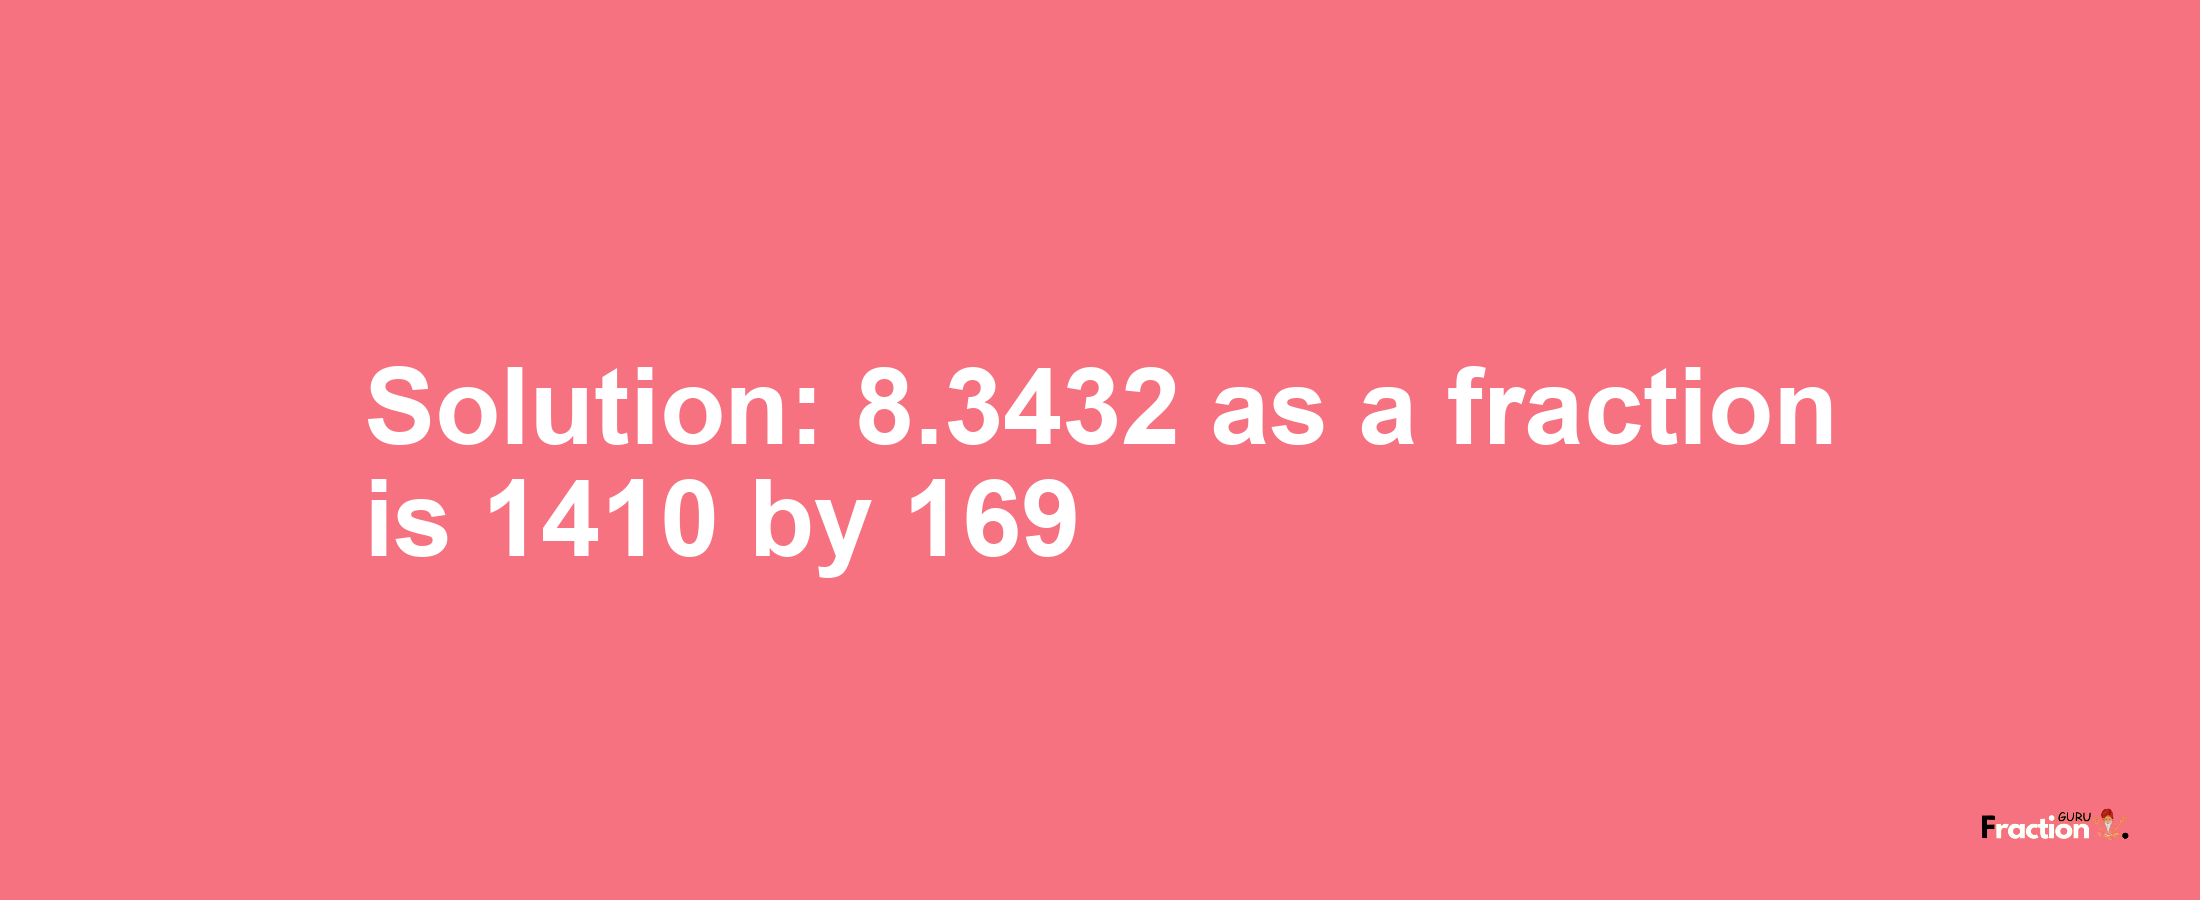 Solution:8.3432 as a fraction is 1410/169